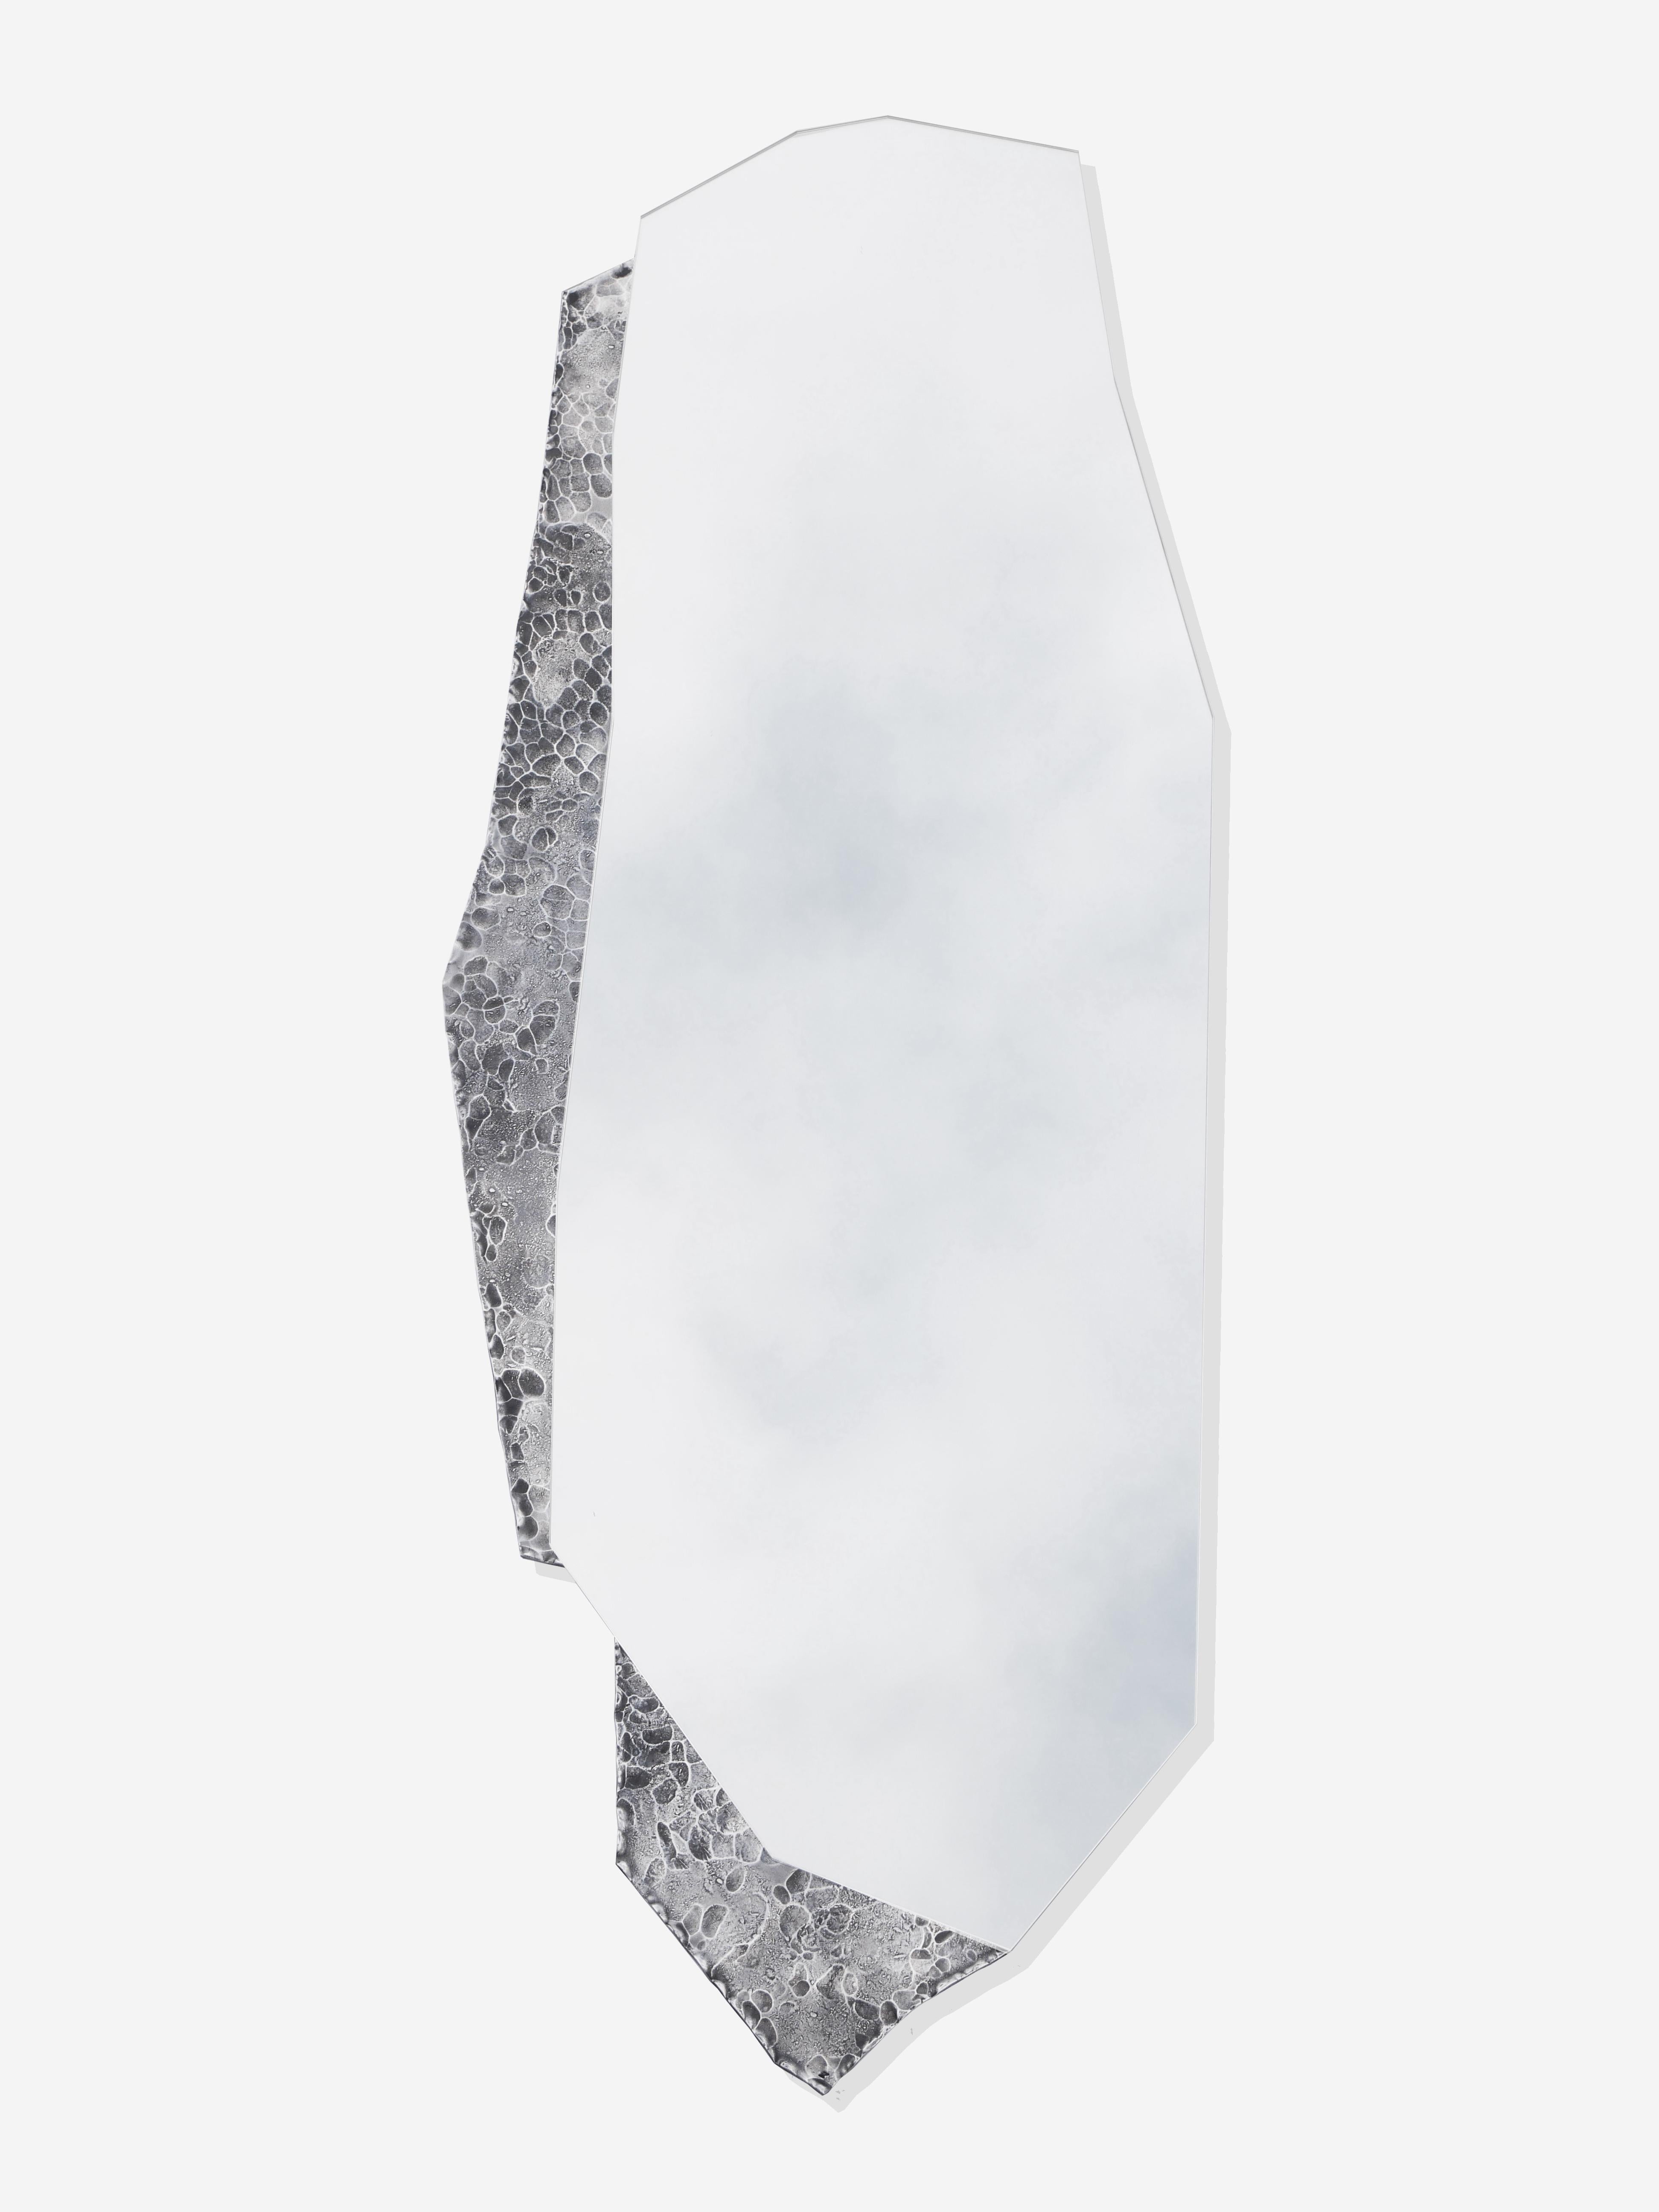 Fragment Wall Mirror by ROCHE & FRÈRES
Limited Edition Of 8 Pieces + 4 A.P.
Dimensions: D 1,6 x W 67 x H 173 cm.
Materials: Polished and hand-forged stainless steel and silver mirror.
Weight: 34 kg. 

Ice Memory Collection
Inspired by the fragments